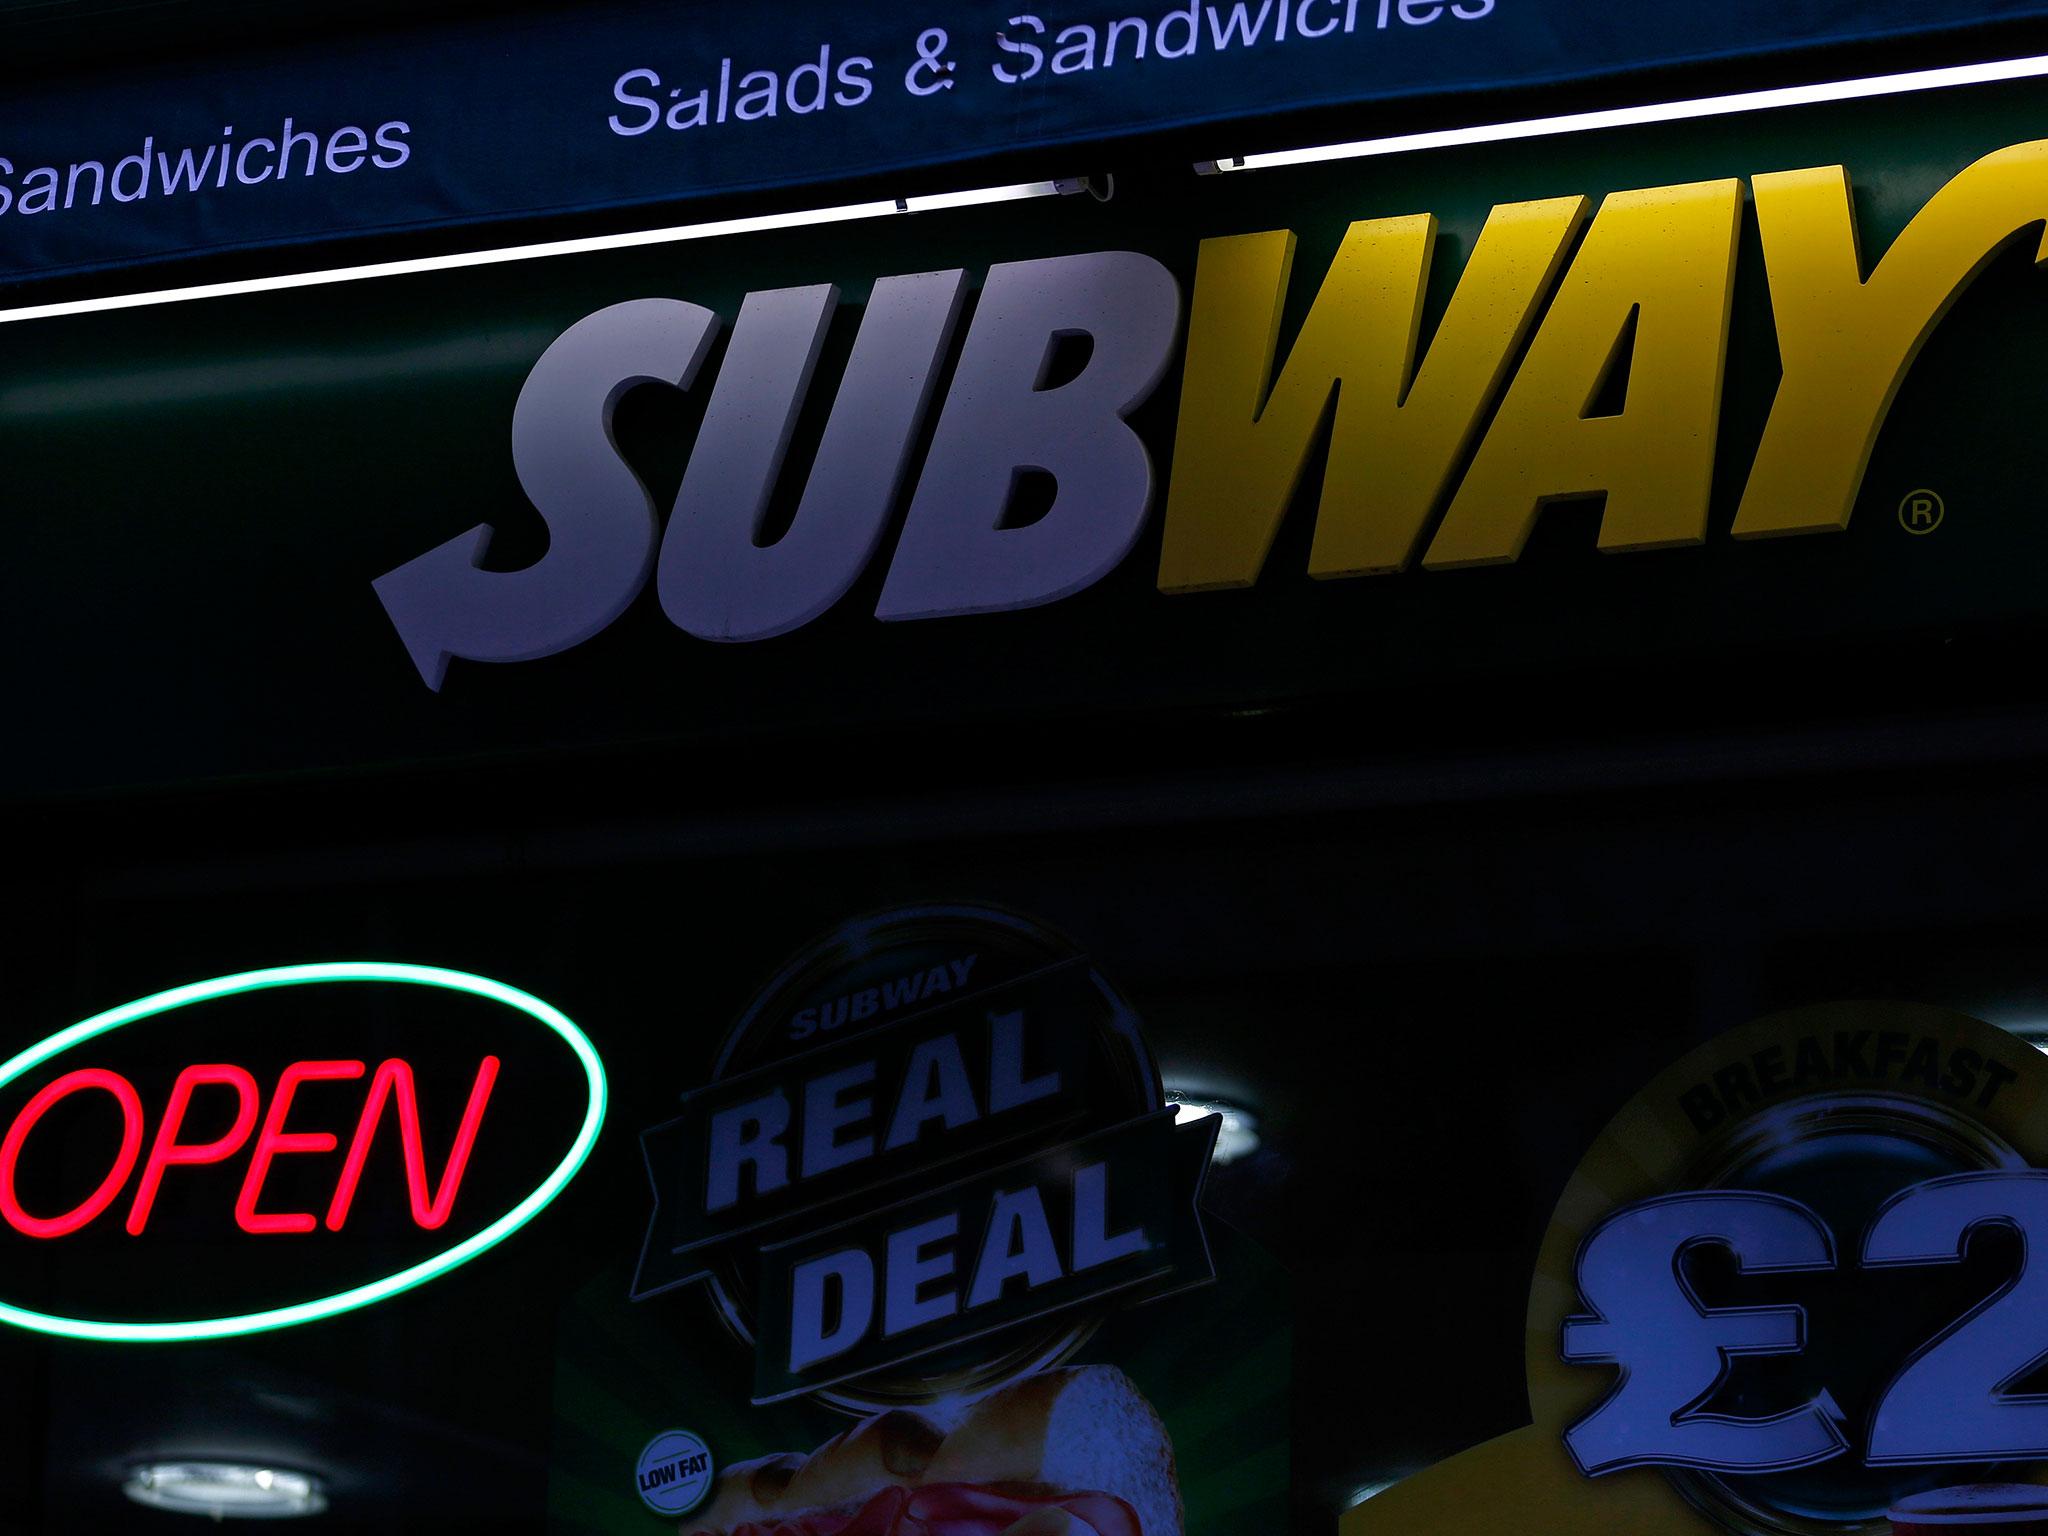 The two Subway sandwiches were the worst offenders